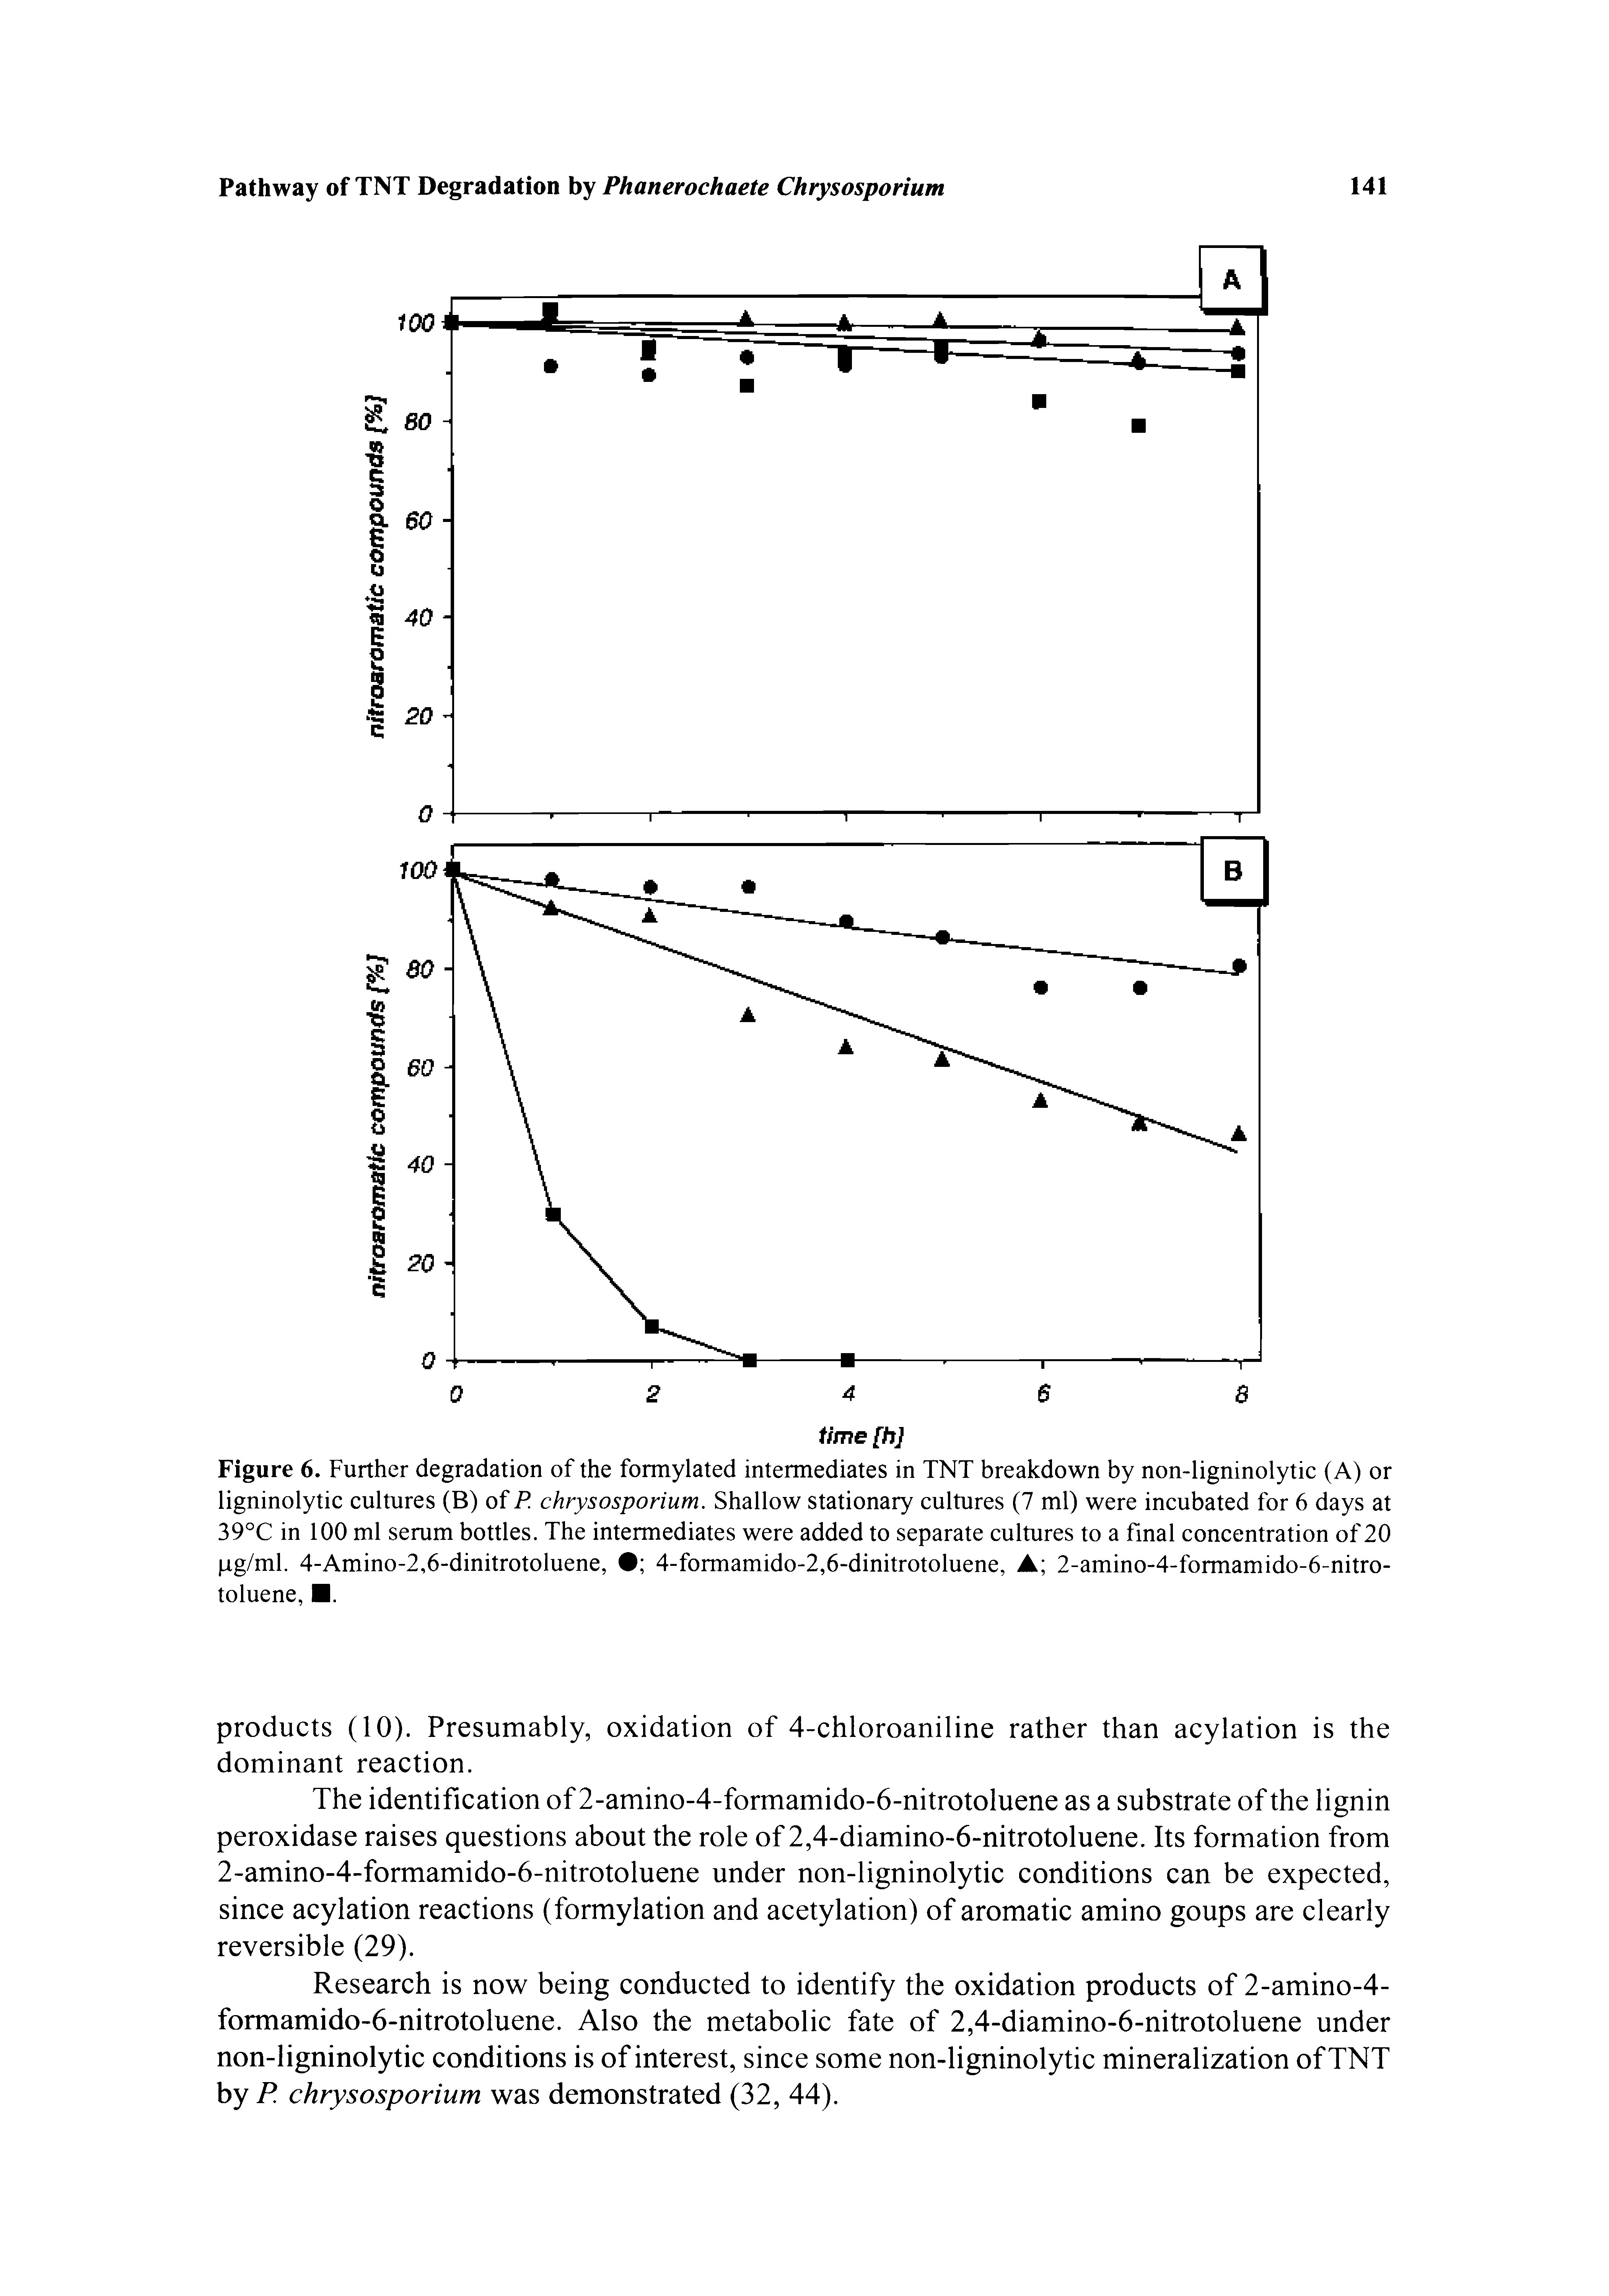 Figure 6. Further degradation of the formylated intermediates in TNT breakdown by non-ligninolytic (A) or ligninolytic cultures (B) of P. chrysosporium. Shallow stationary cultures (7 ml) were incubated for 6 days at 39°C in 100 ml serum bottles. The intermediates were added to separate cultures to a final concentration of 20 pg/ml. 4-Amino-2,6-dinitrotoluene, 4-formamido-2,6-dinitrotoluene, A 2-amino-4-formamido-6-nitro-toluene, .